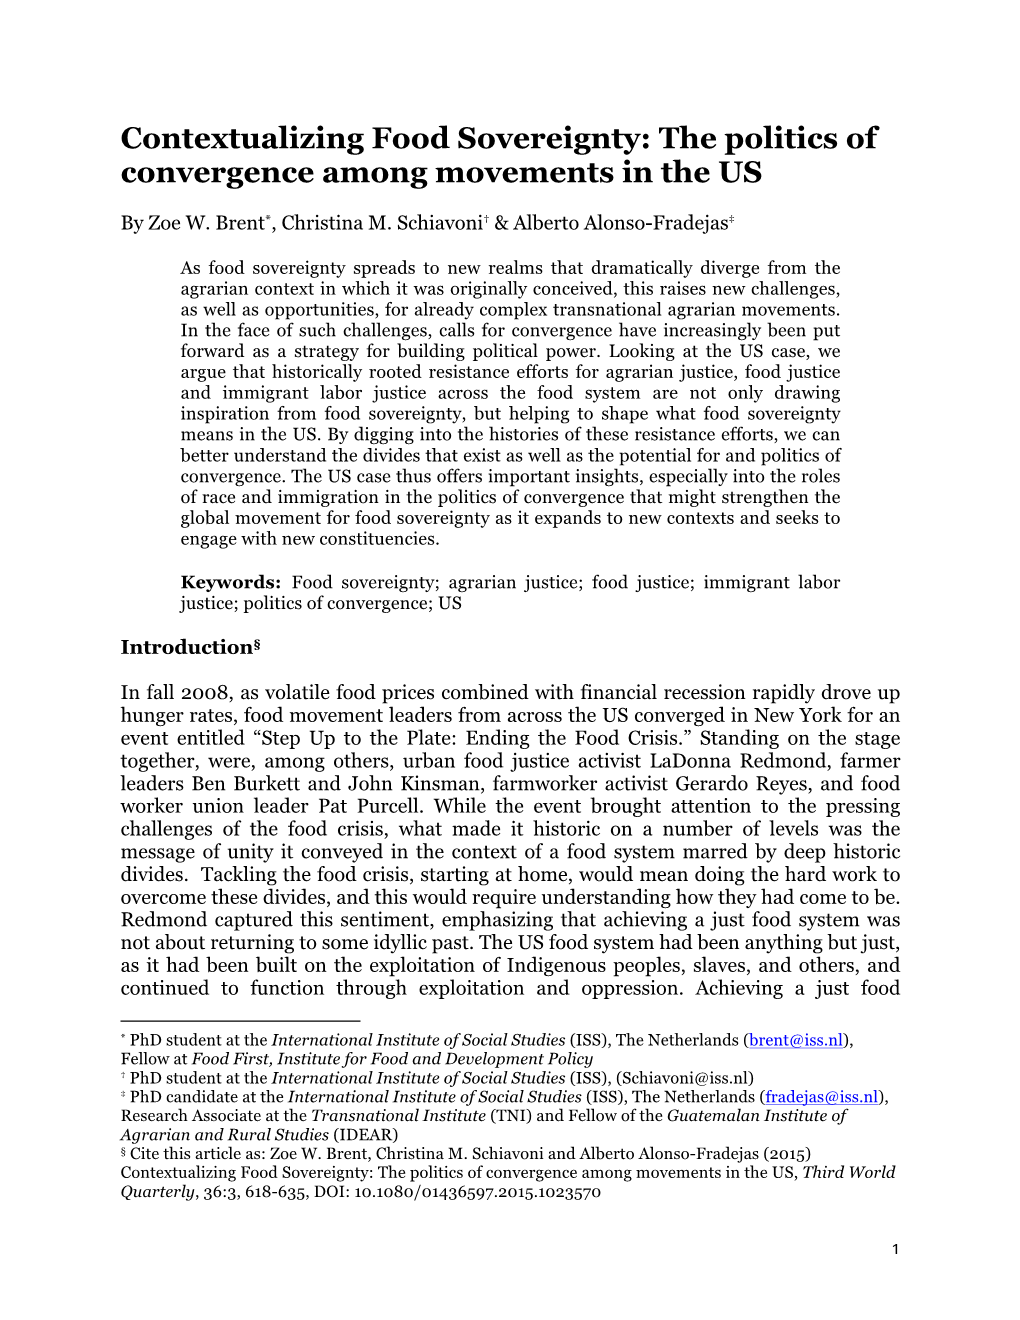 Contextualizing Food Sovereignty: the Politics of Convergence Among Movements in the US